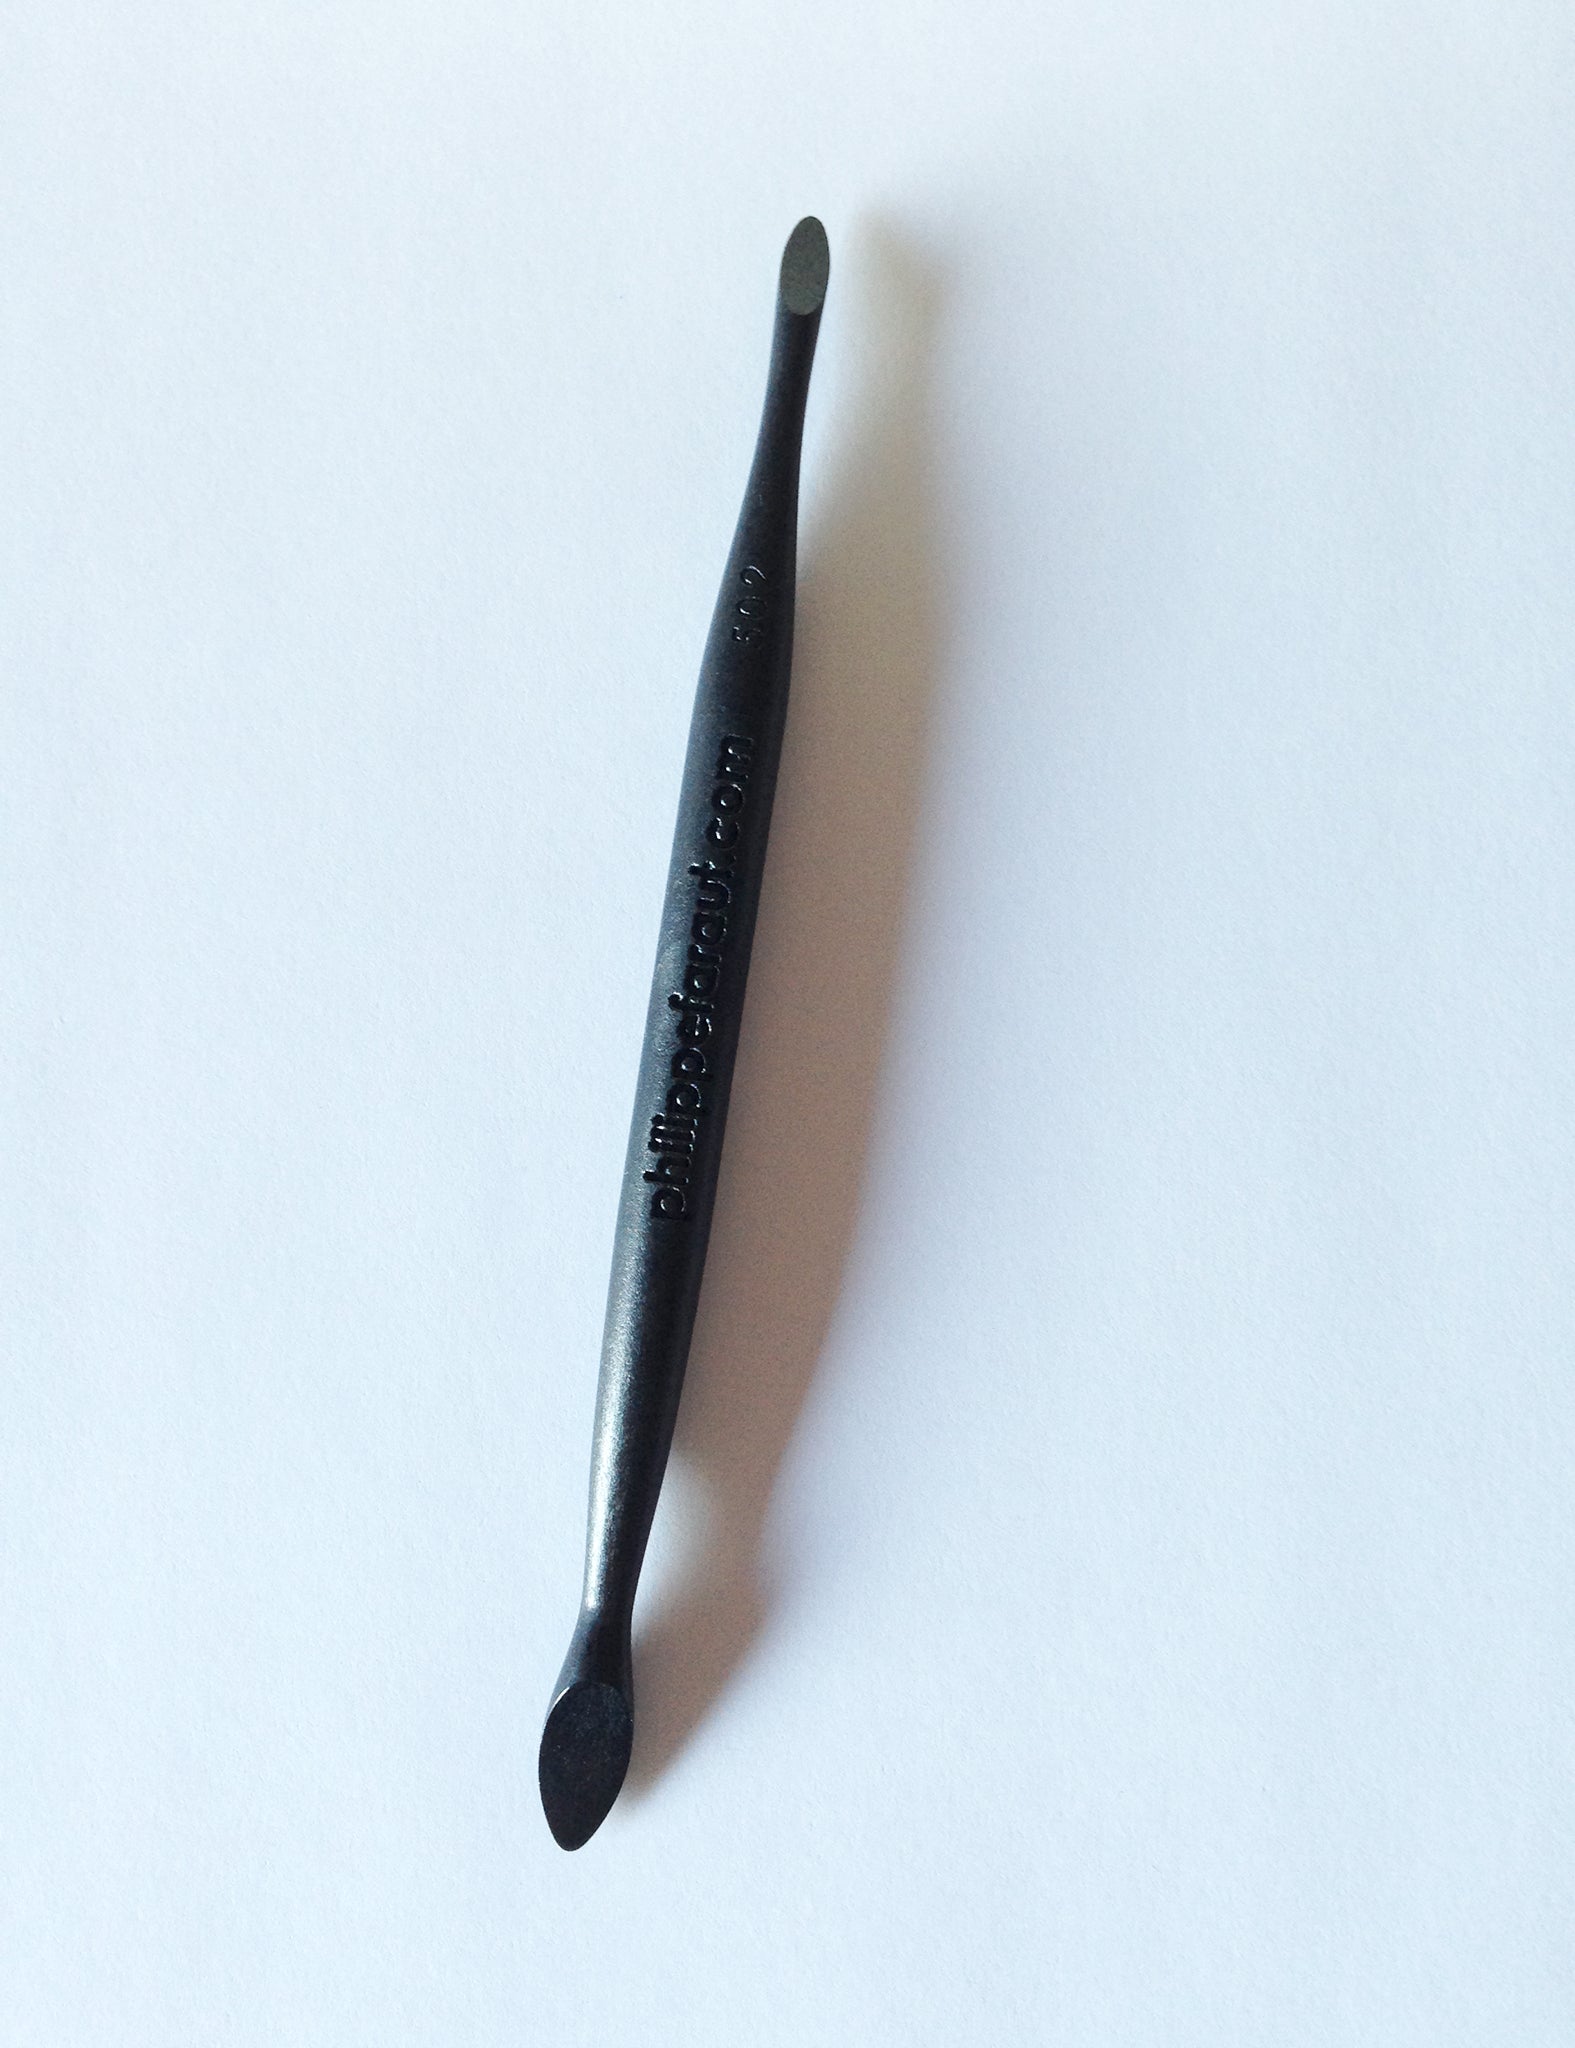 Modeling and Sculpting Tool, Pottery Tool